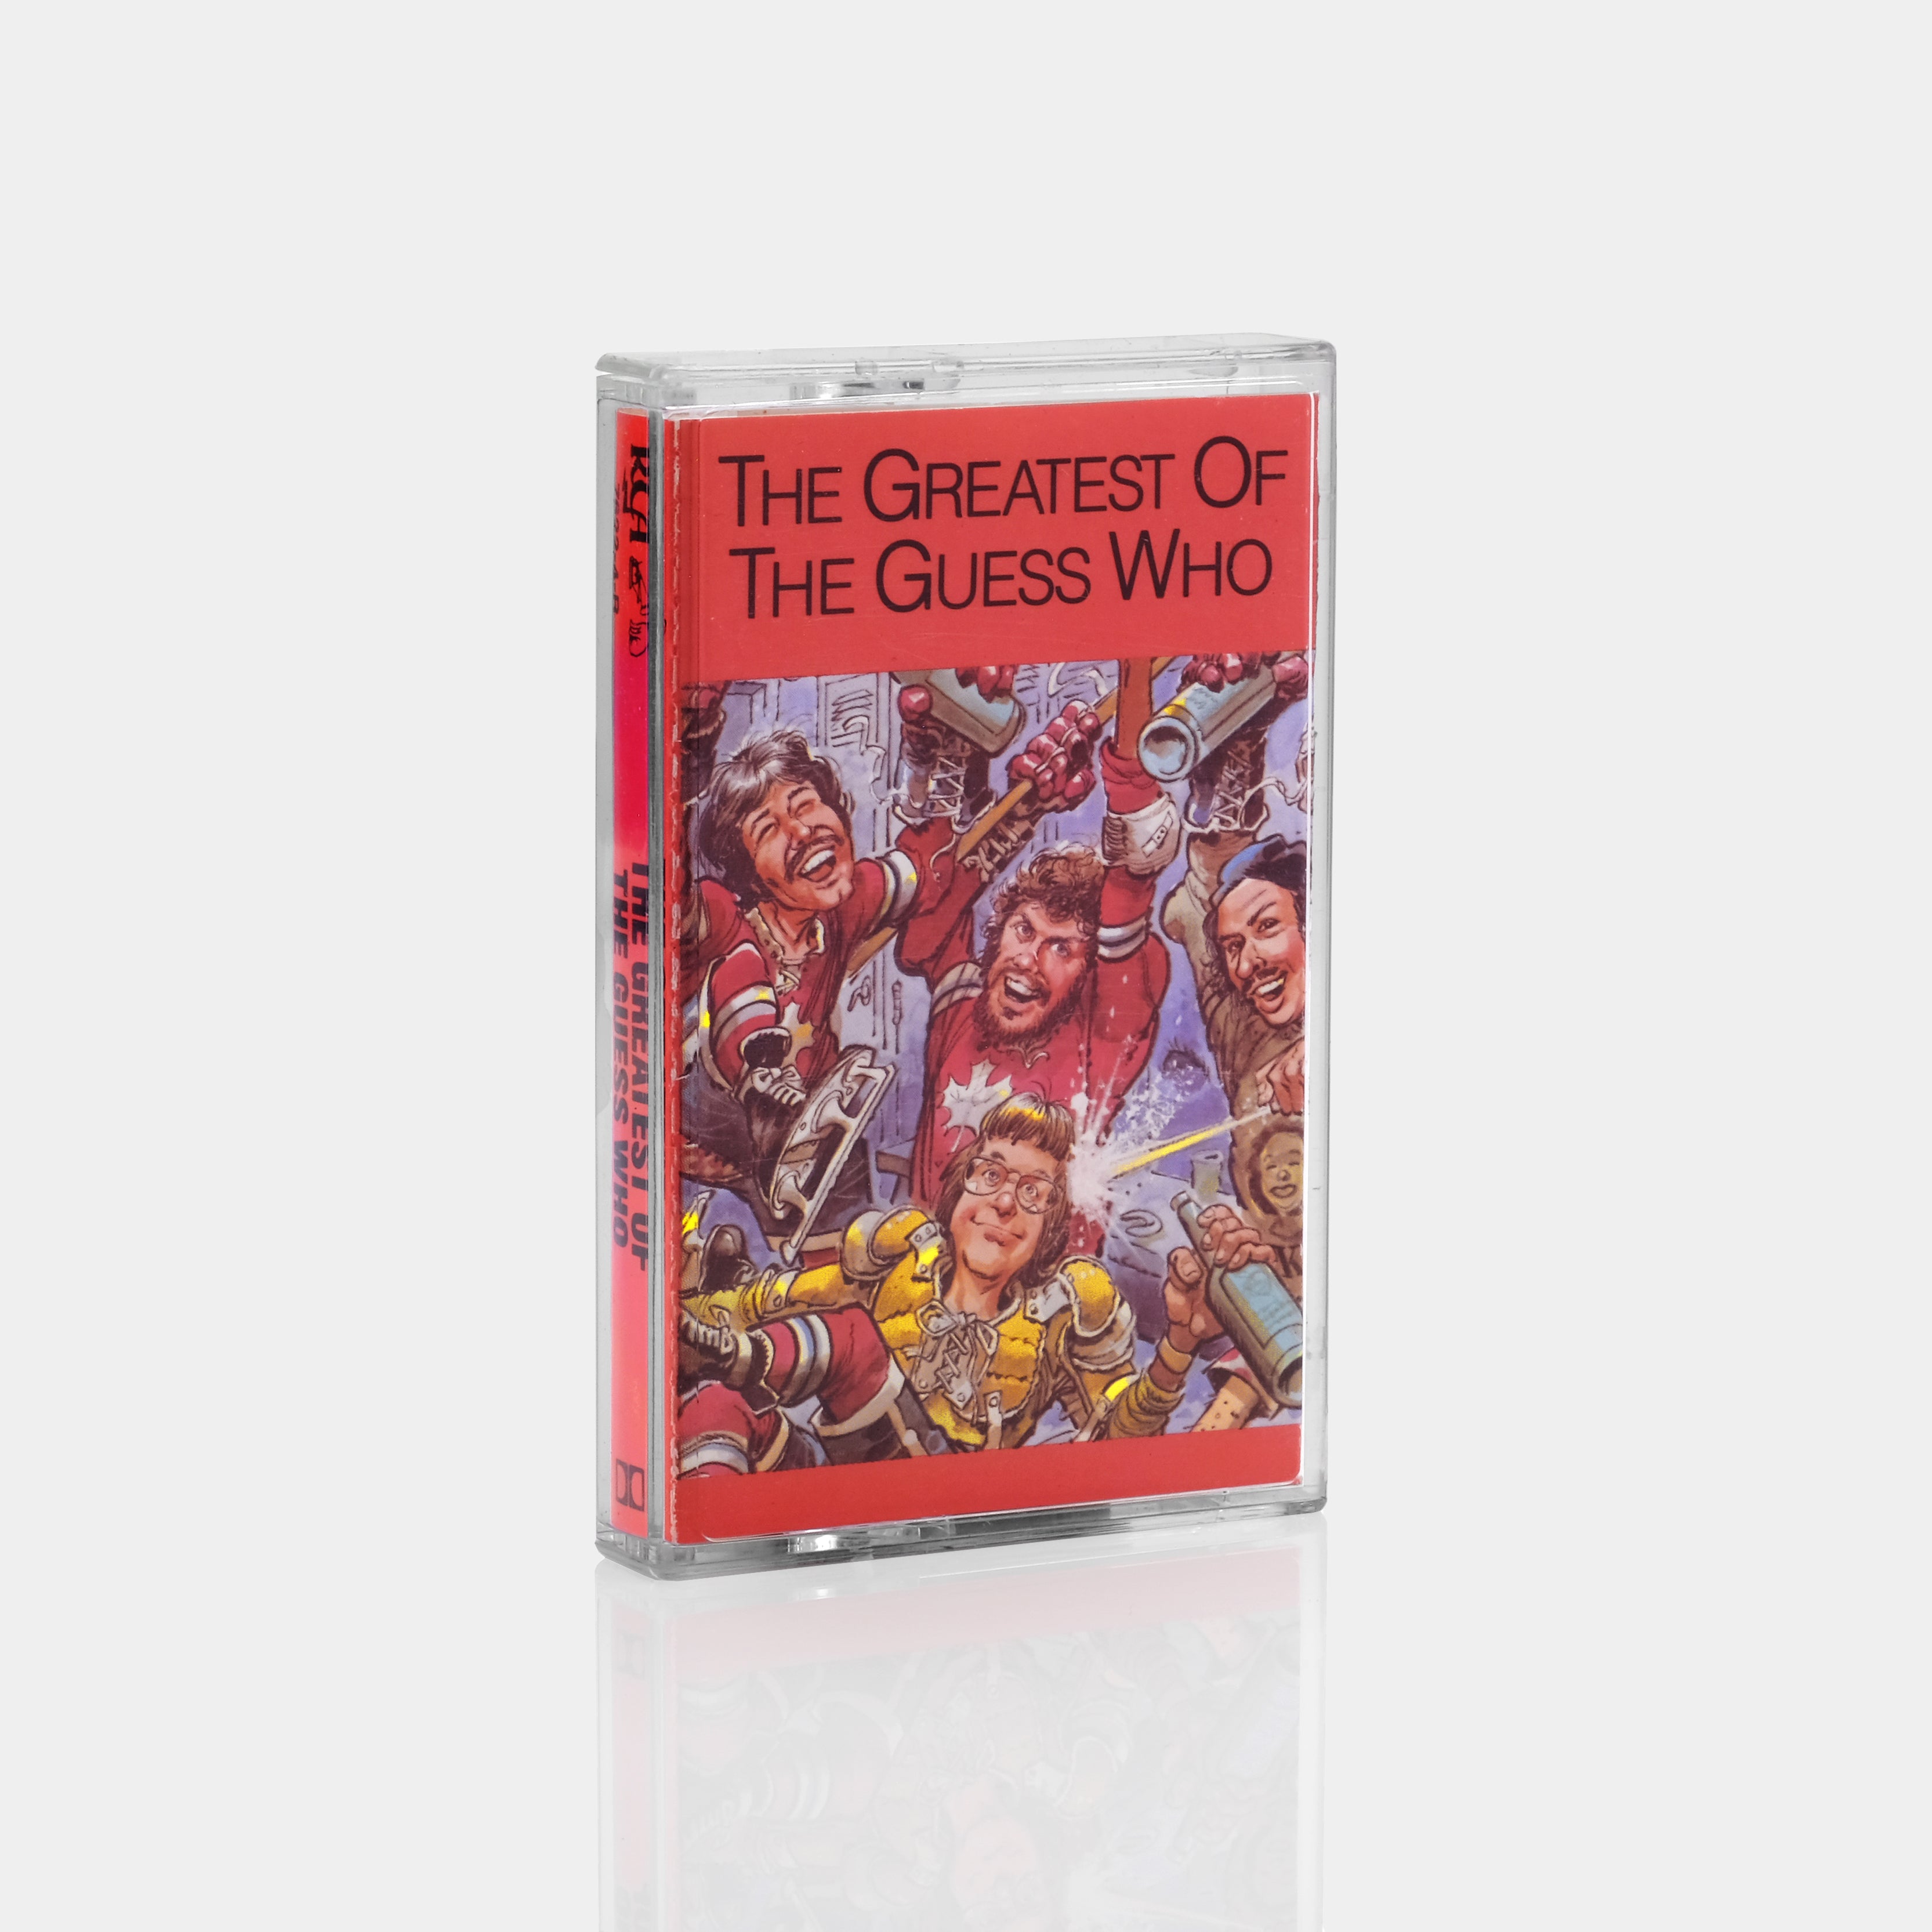 The Guess Who - The Greatest Of The Guess Who Cassette Tape